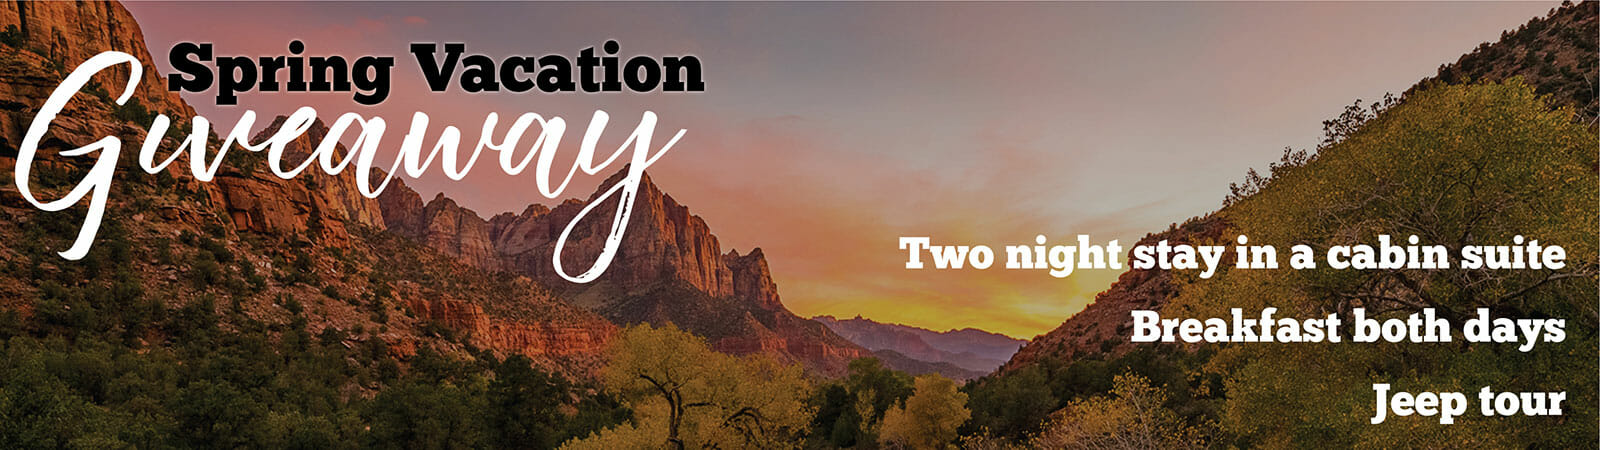 Zion Spring vacation giveaway